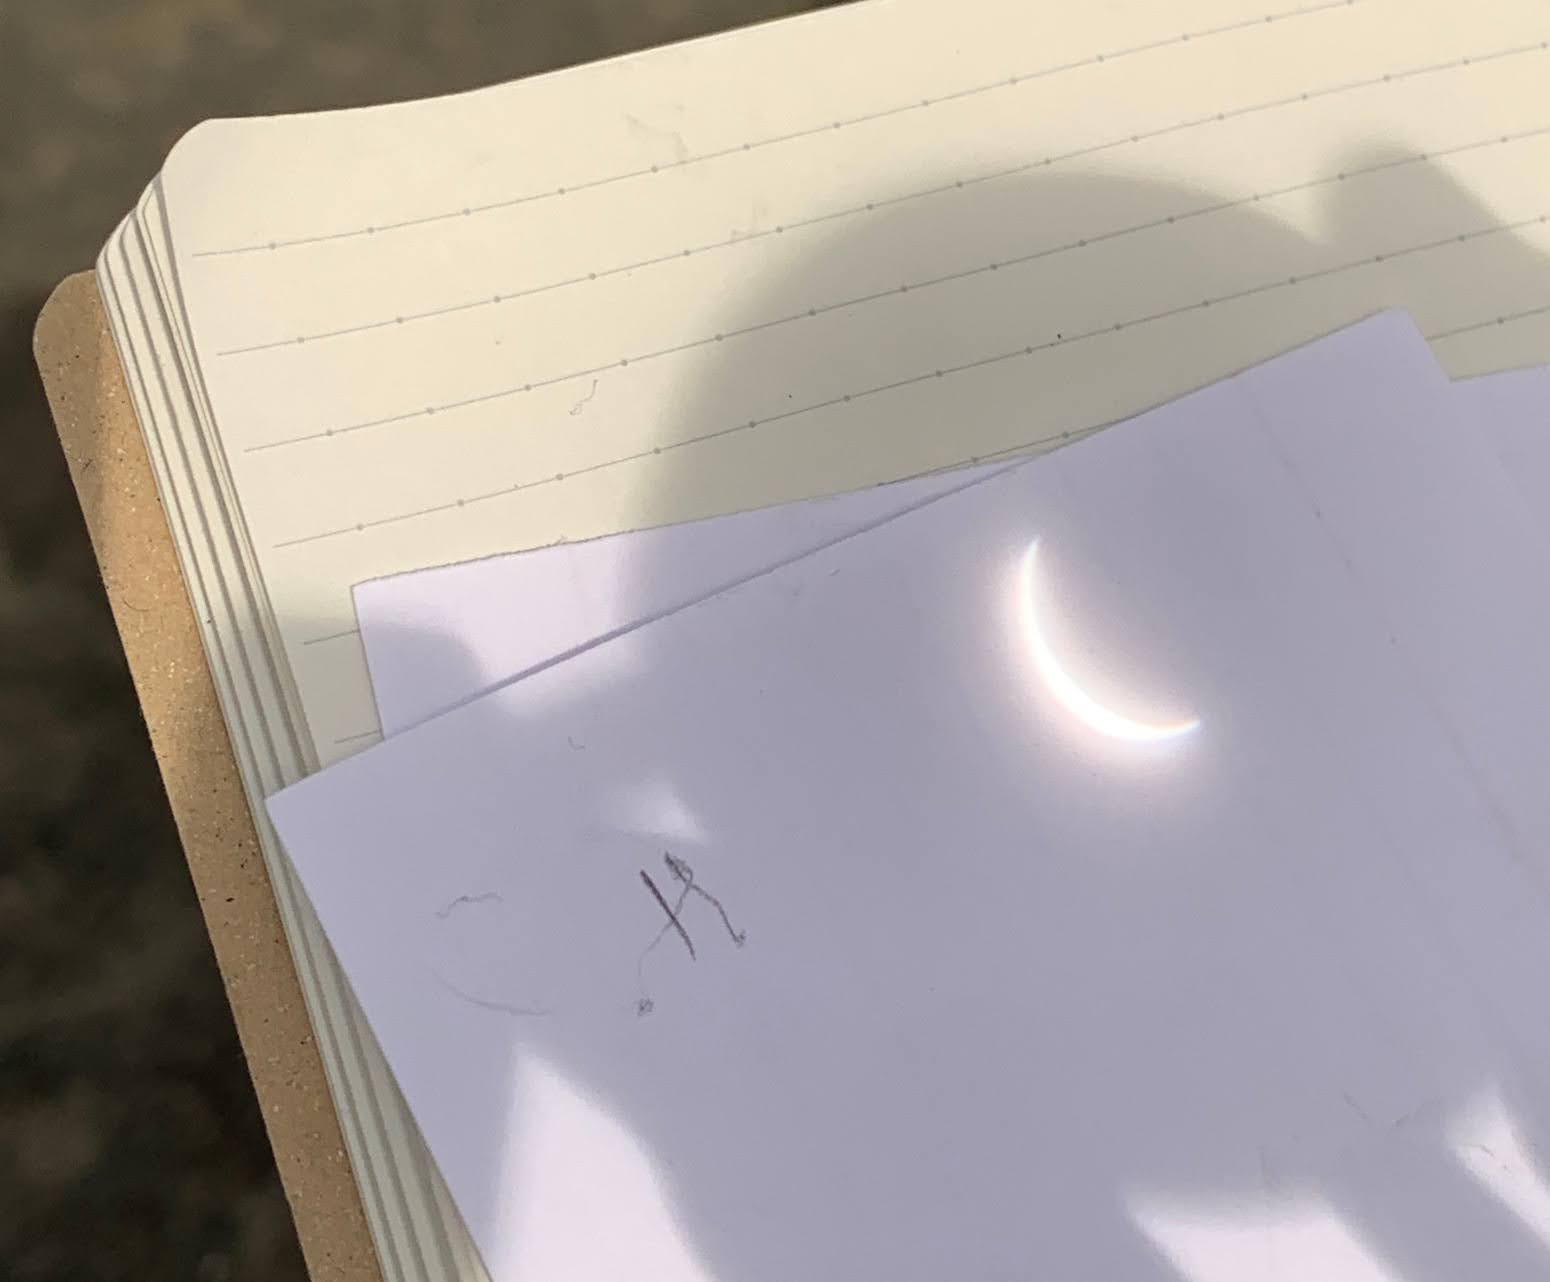 Alt: The crescent sun is projected through a monocular onto a white card resting on a lined notebook page. The shadow of the monocular surrounds the image of the sun.